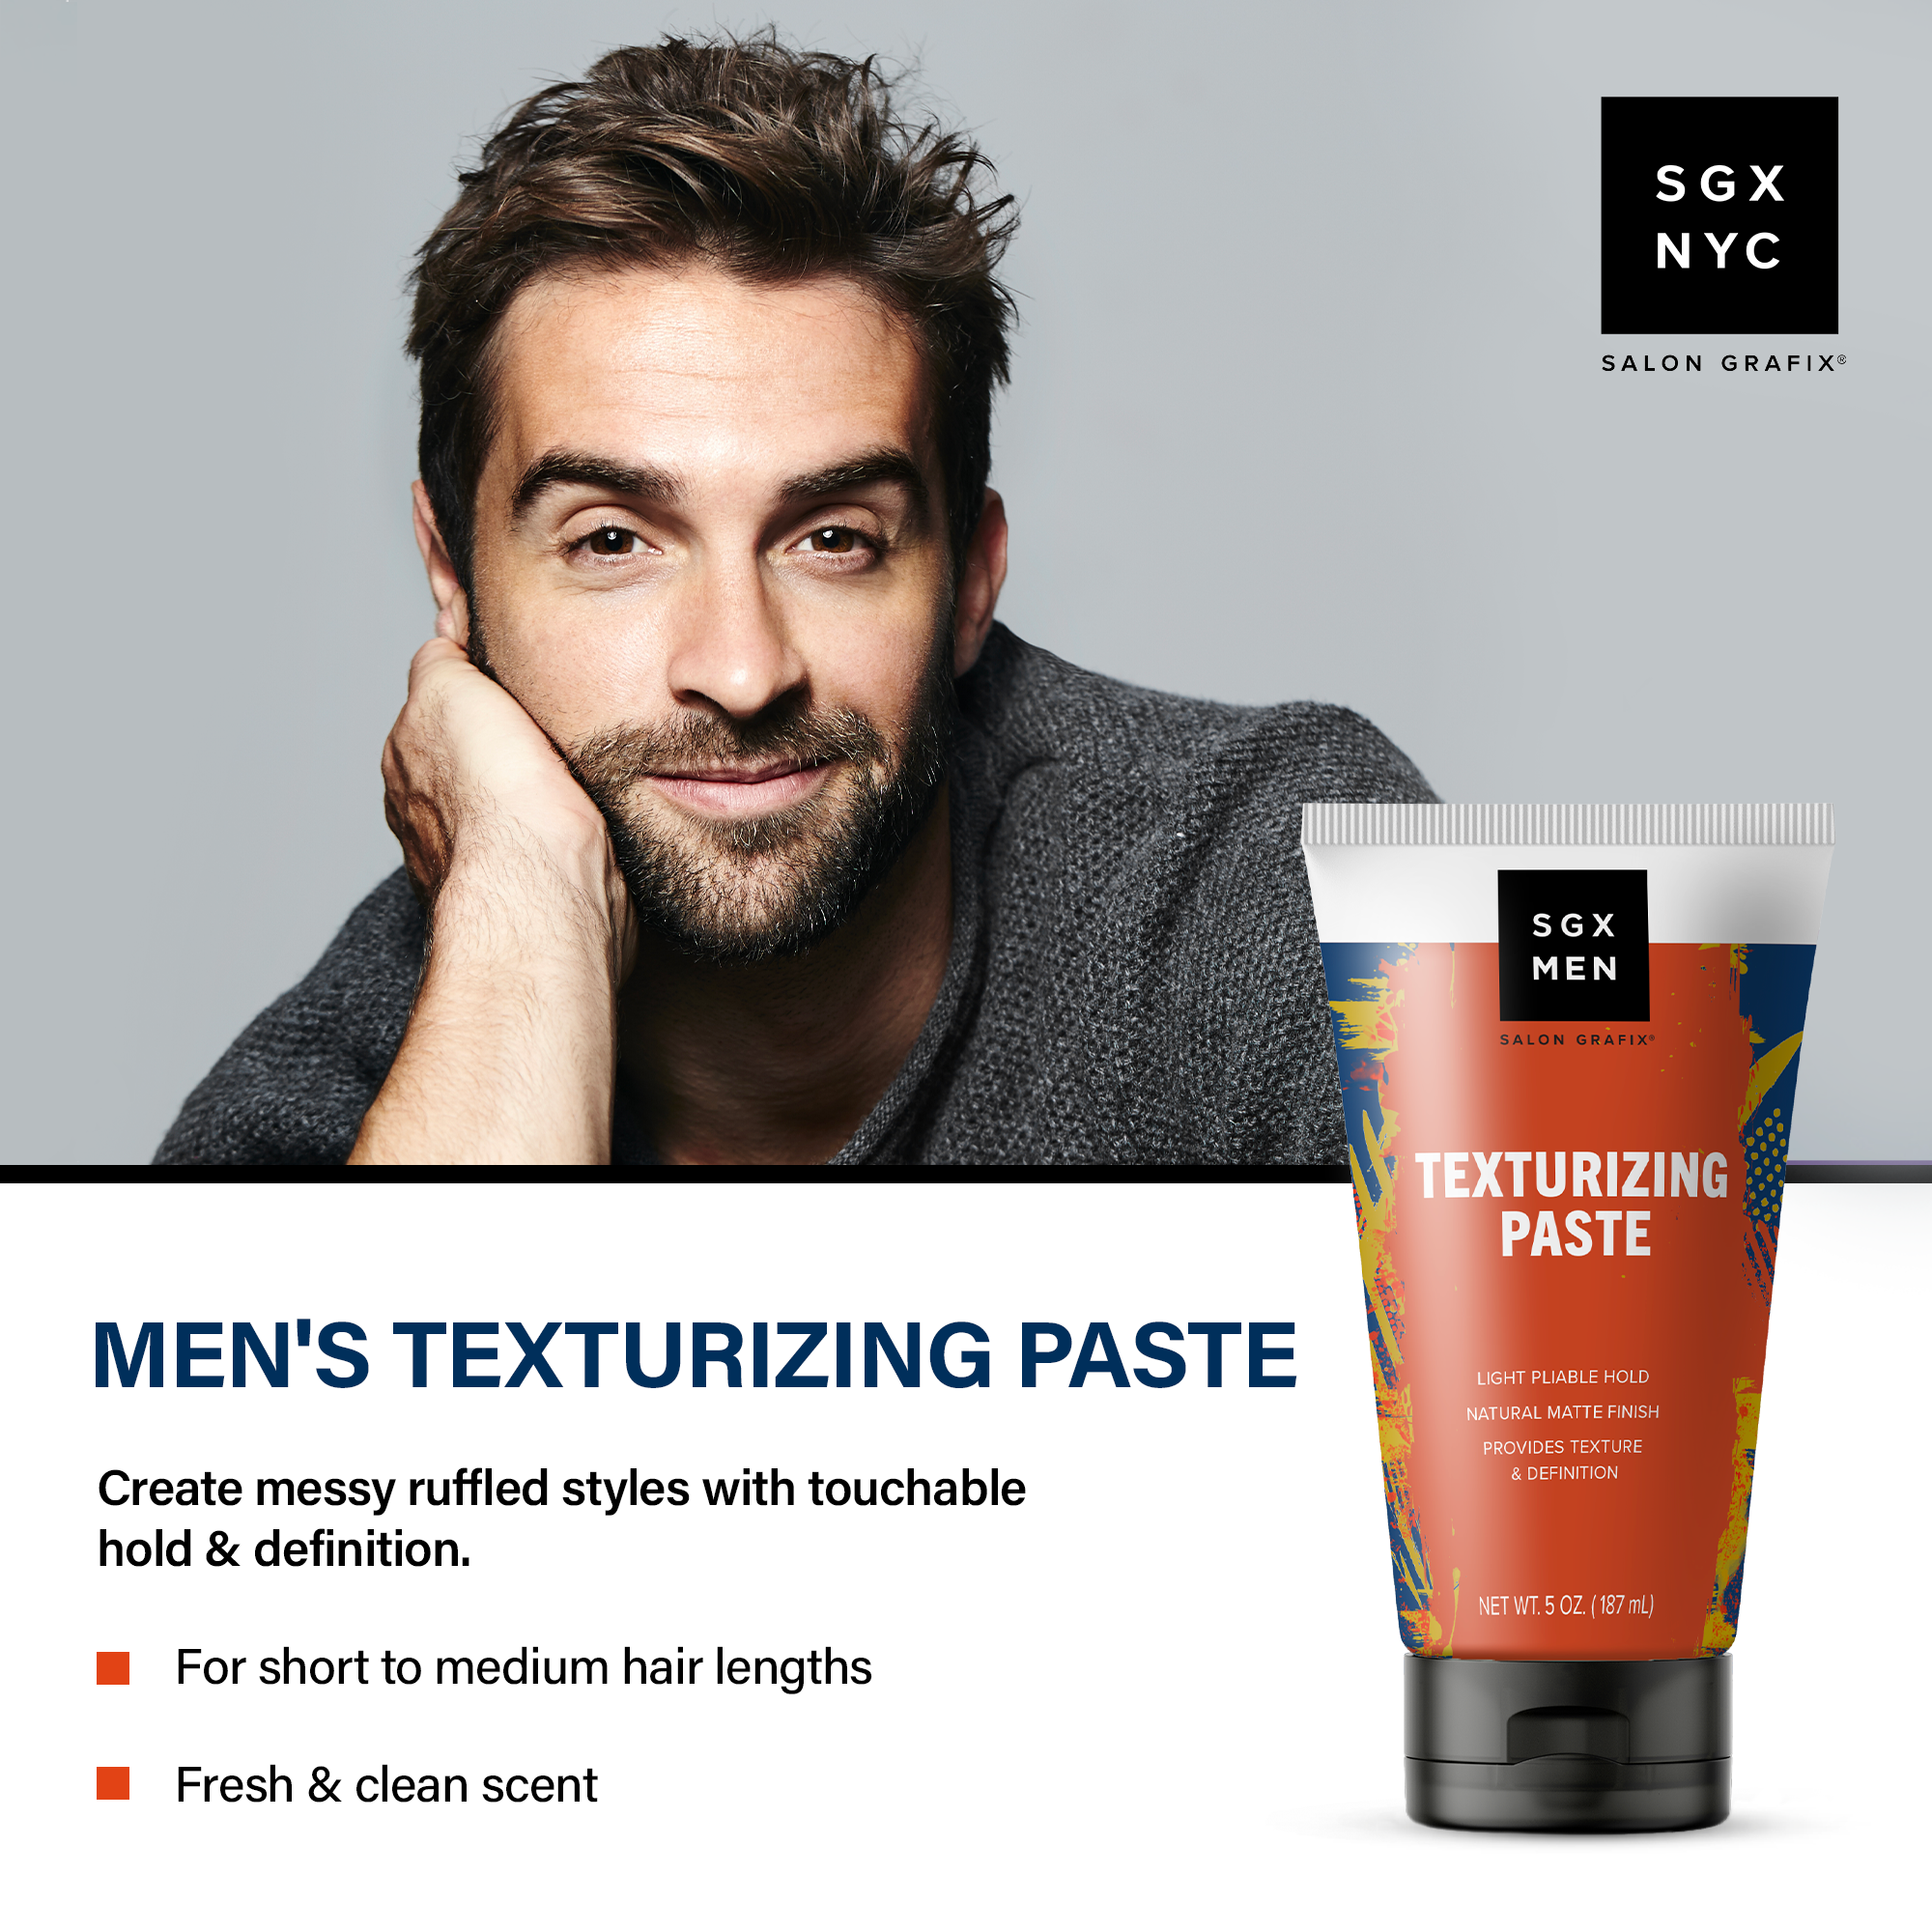 SGX NYC Men's Texturizing Paste, for All Hair Types, Light Hold, 5 oz - image 2 of 7